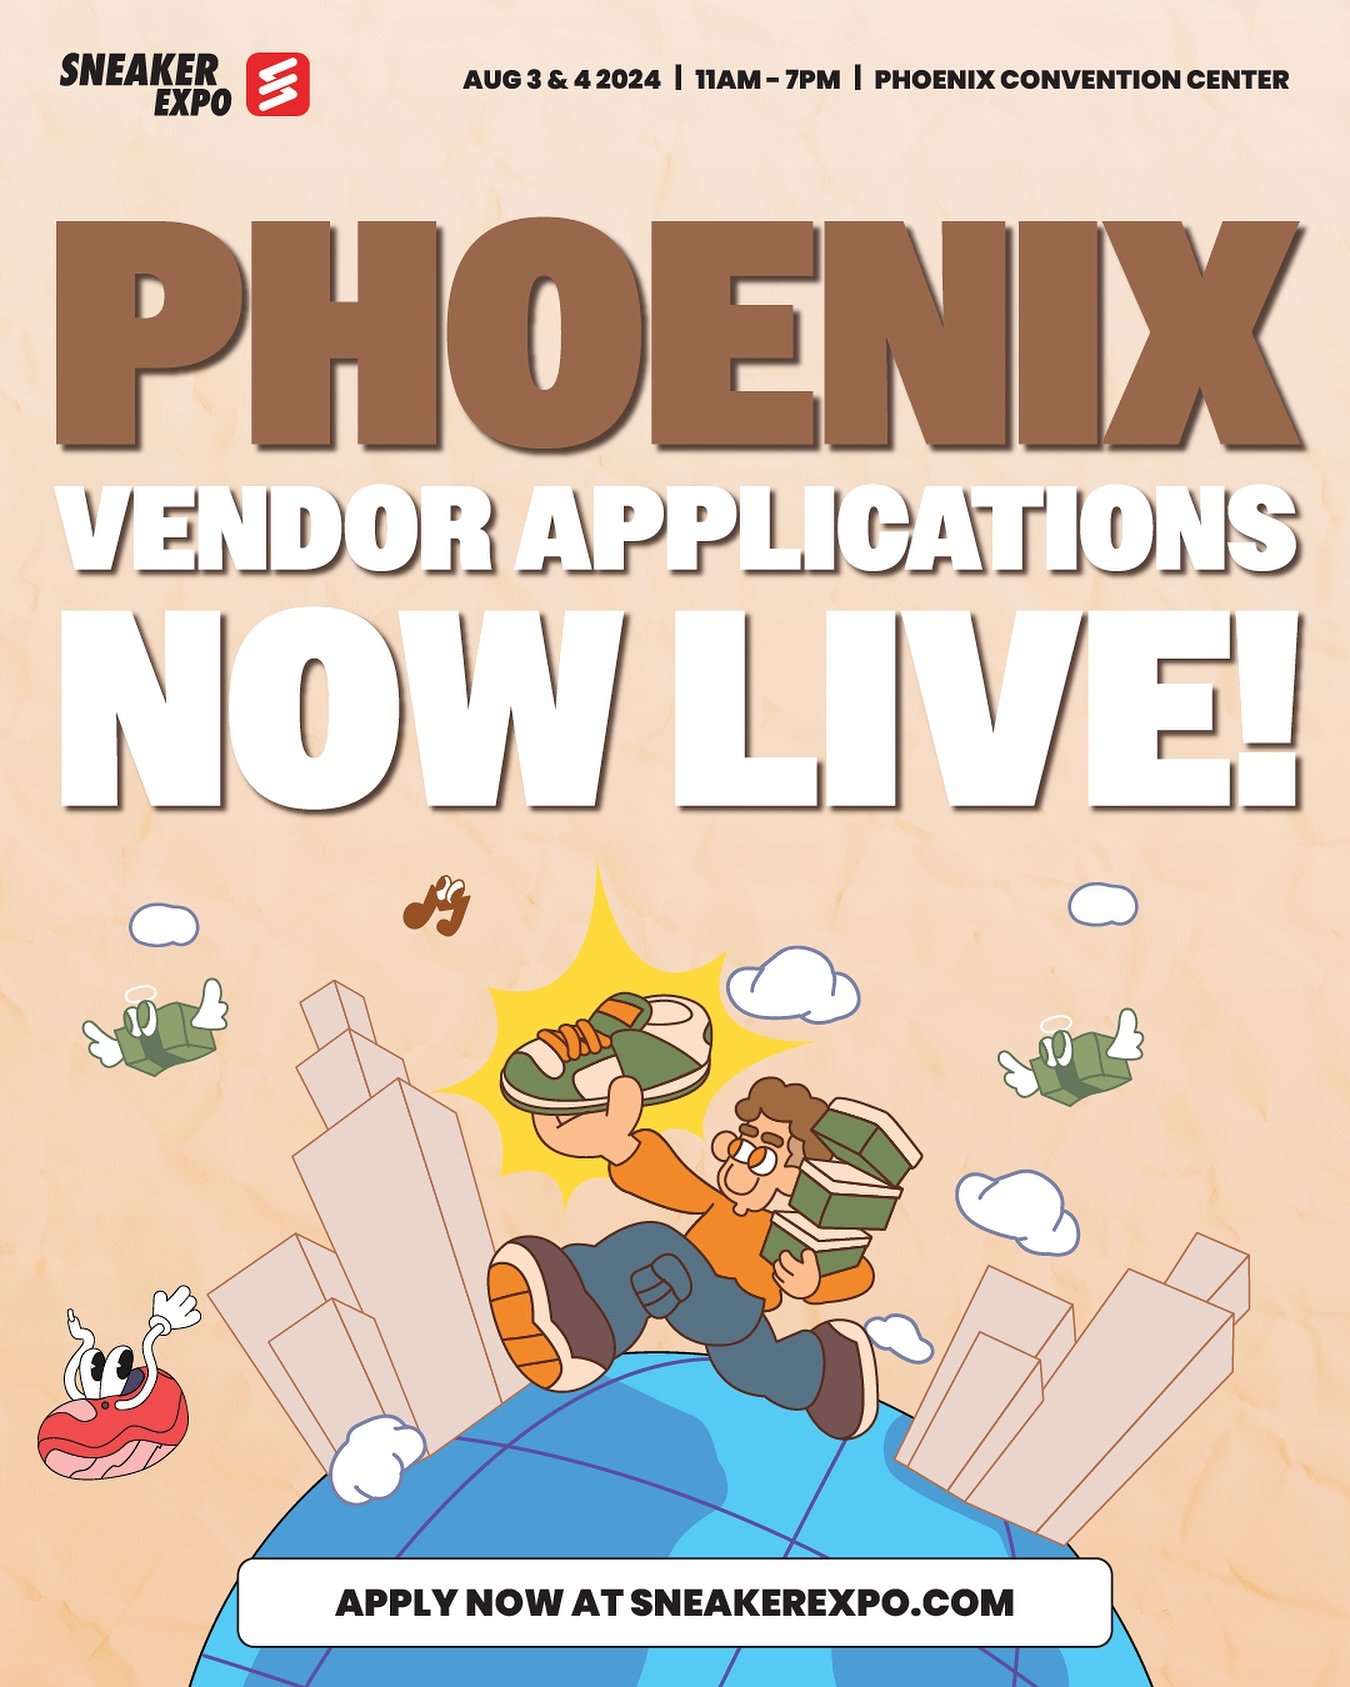 VENDOR REGISTRATION! 👀🔥

Vendor registration is now live! It&rsquo;s going to be a movie in PHOENIX! Make sure to lock em&rsquo; in now SPACING IS LIMITED!

🌵 Phoenix Convention Center
🗓️ August 3 &amp; 4 | ⏰ 11AM - 7PM

Register at Sneakerexpo.c